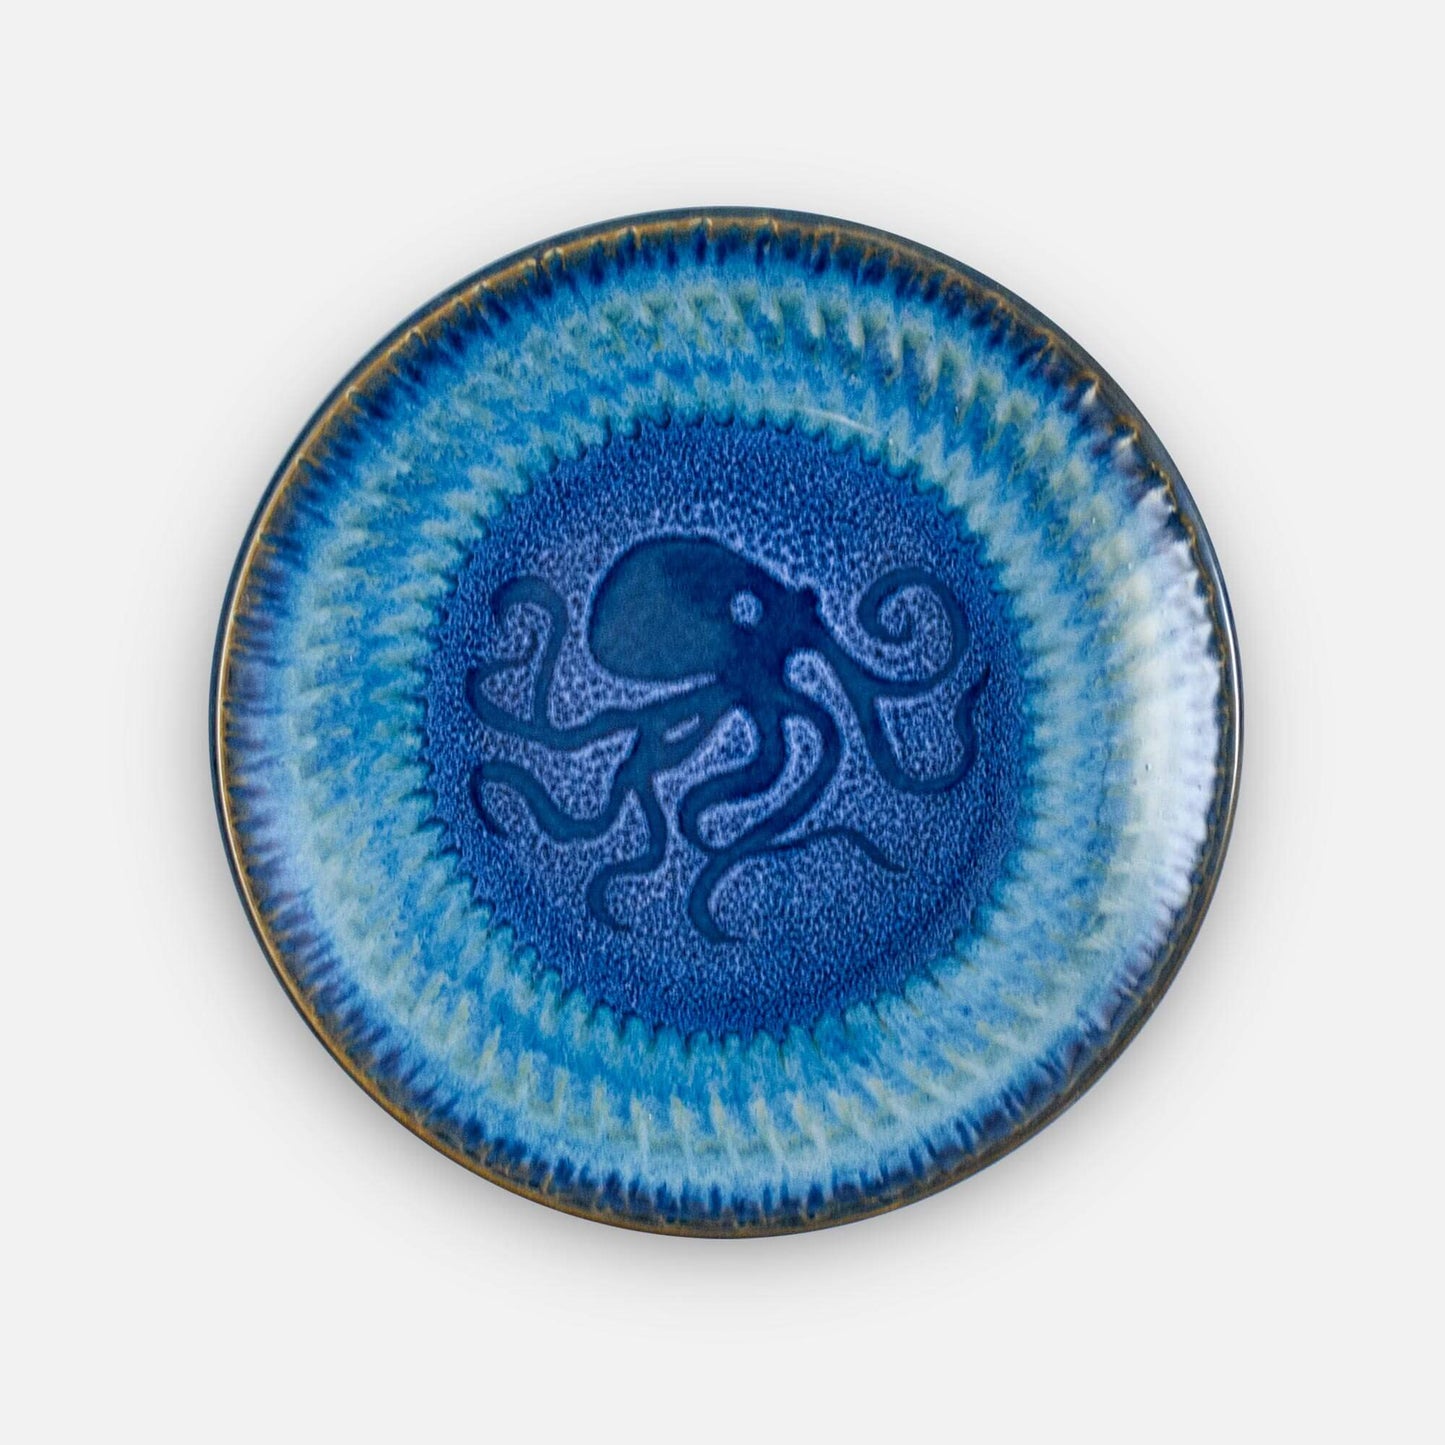 Handmade Pottery Rimless Dinner Plate made by Georgetown Pottery in Maine in Blue Octopus pattern